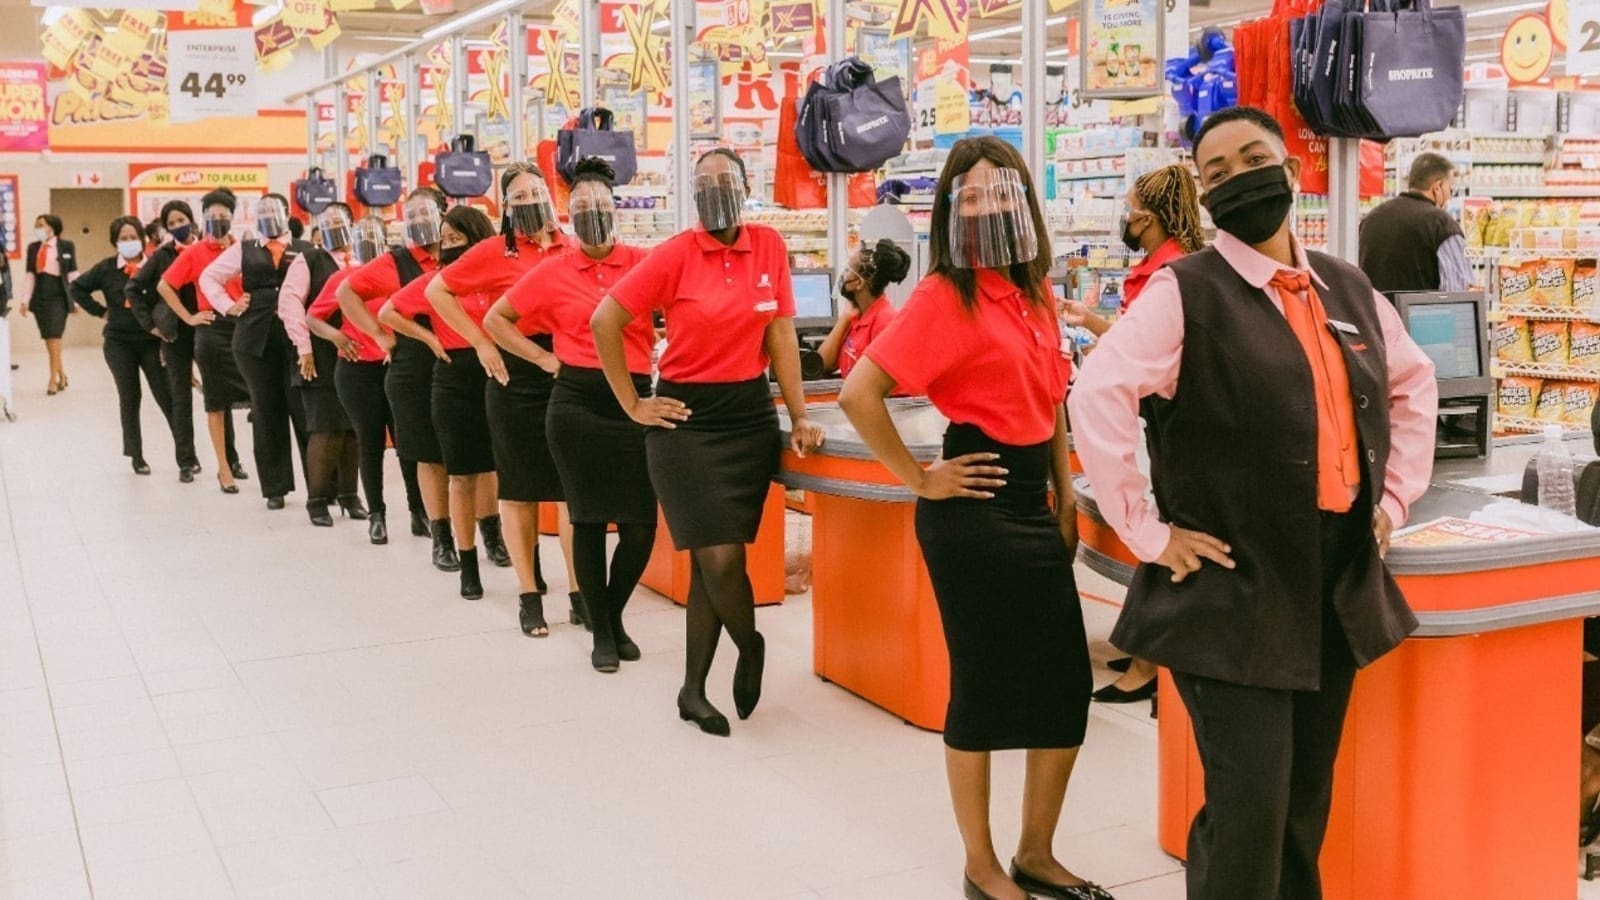 Shoprite banks on home market, opens multiple stores in South Africa